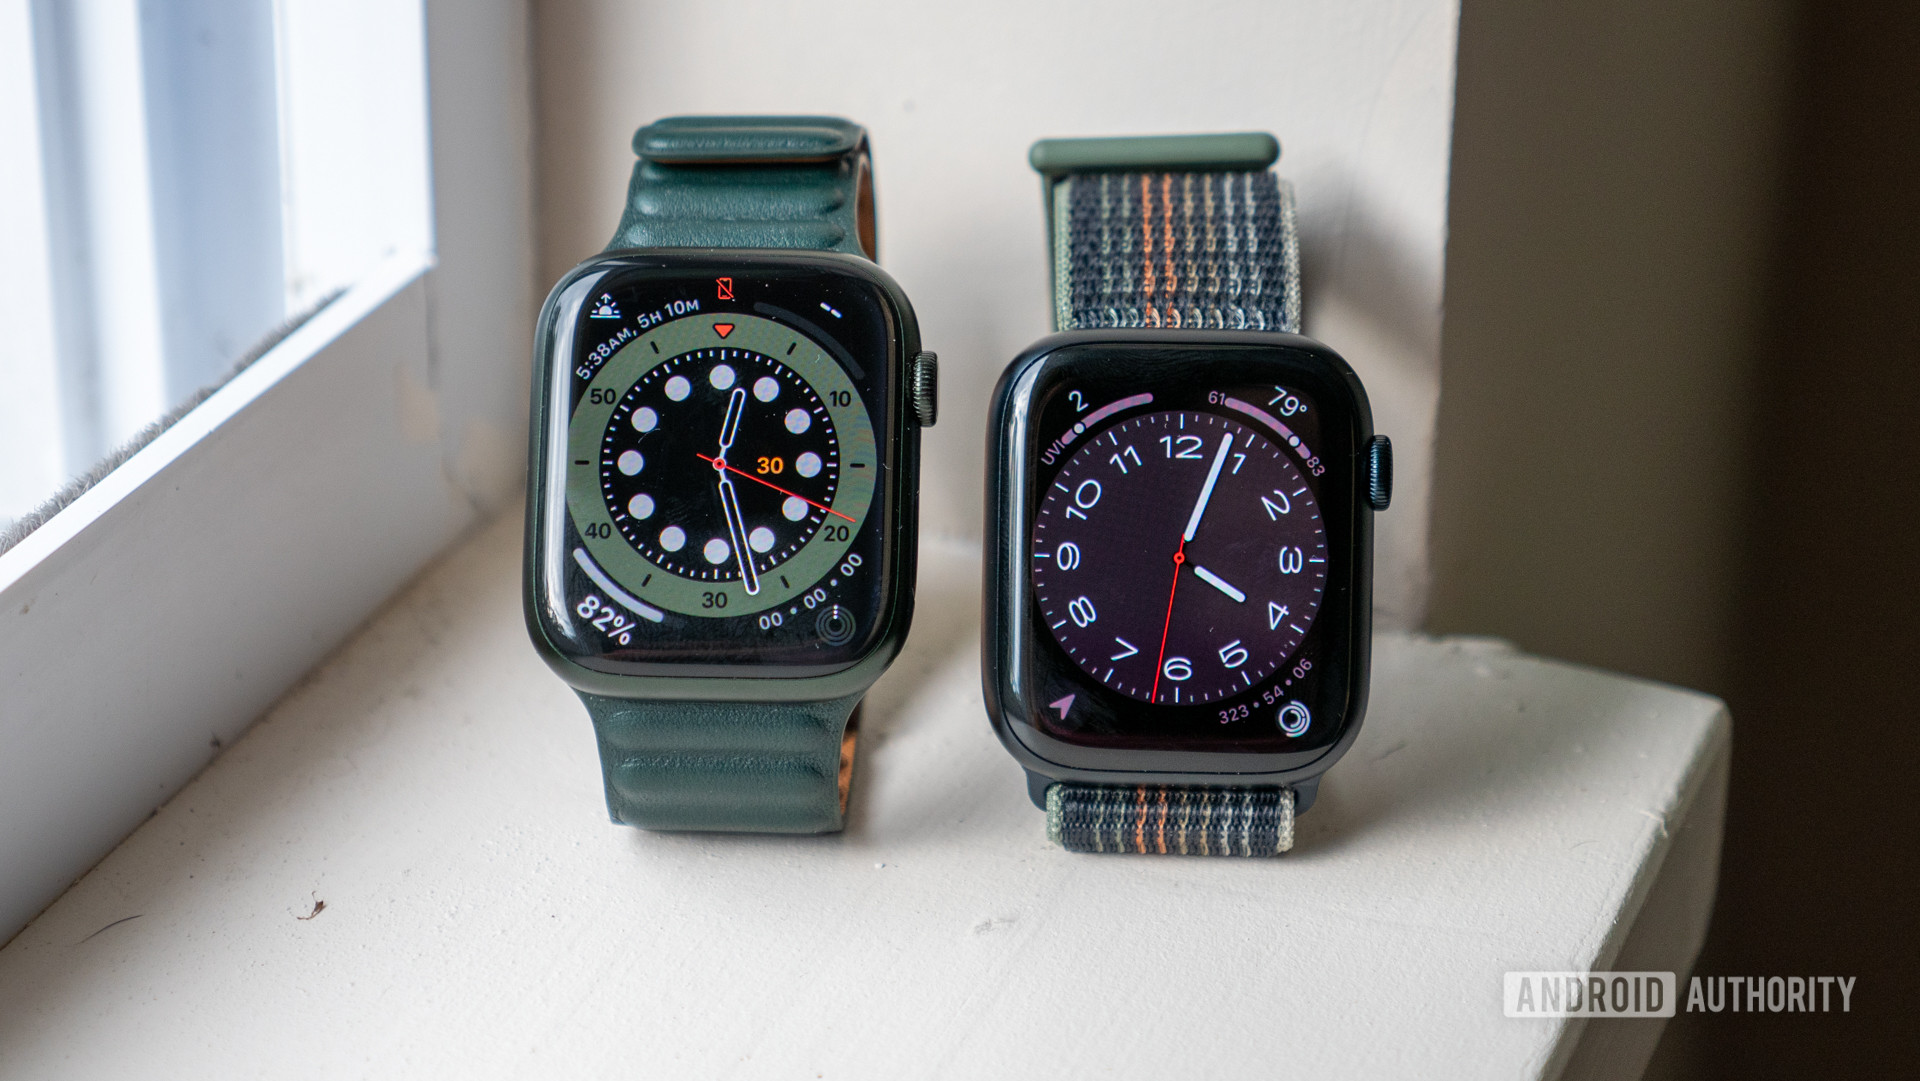 The Apple Watch Series 8 alongside the Apple Watch Series 7 on a windowsill, showing both watch faces.